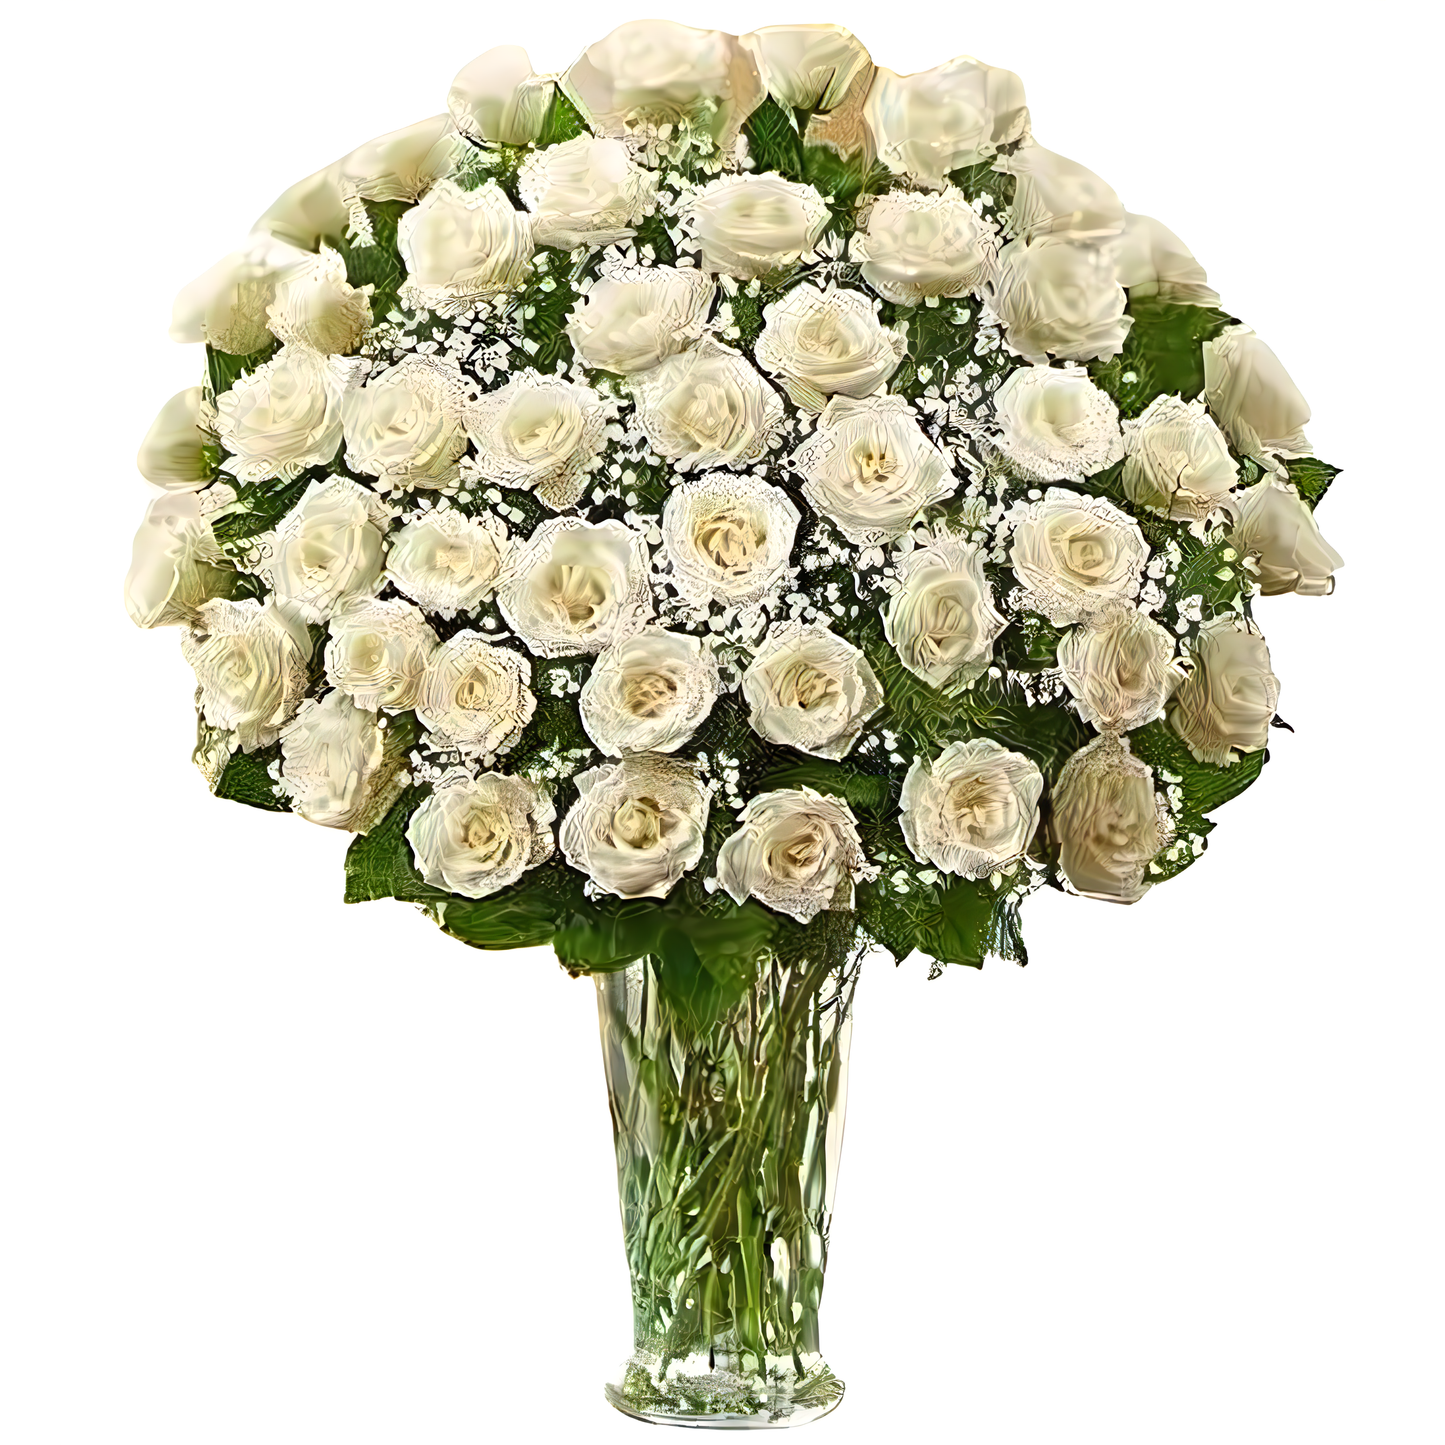 NYC Flower Delivery - Premium Long Stem - 48 White Roses - Roses